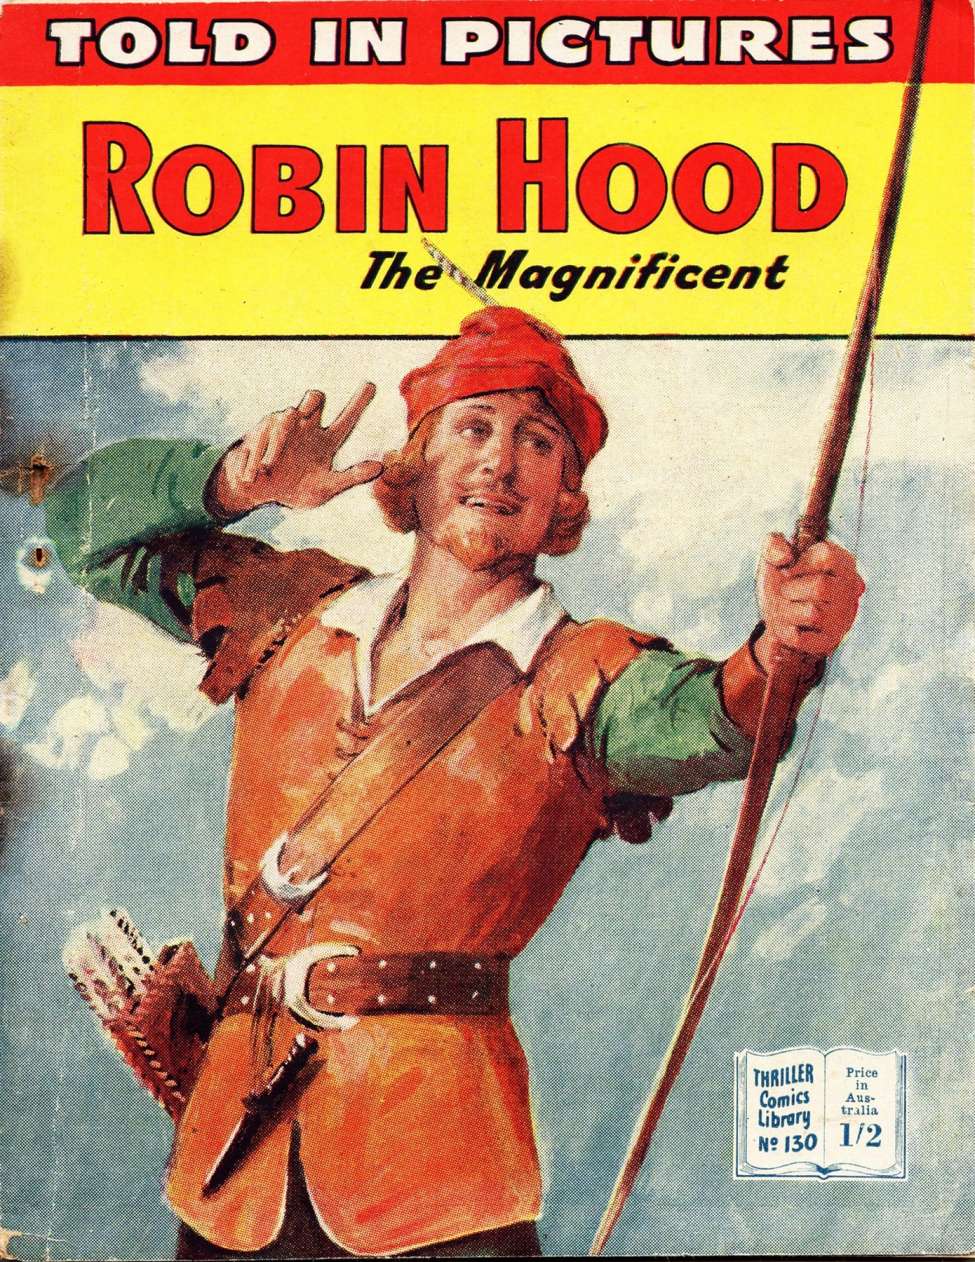 Comic Book Cover For Thriller Comics Library 130 - Robin Hood the Magnificent